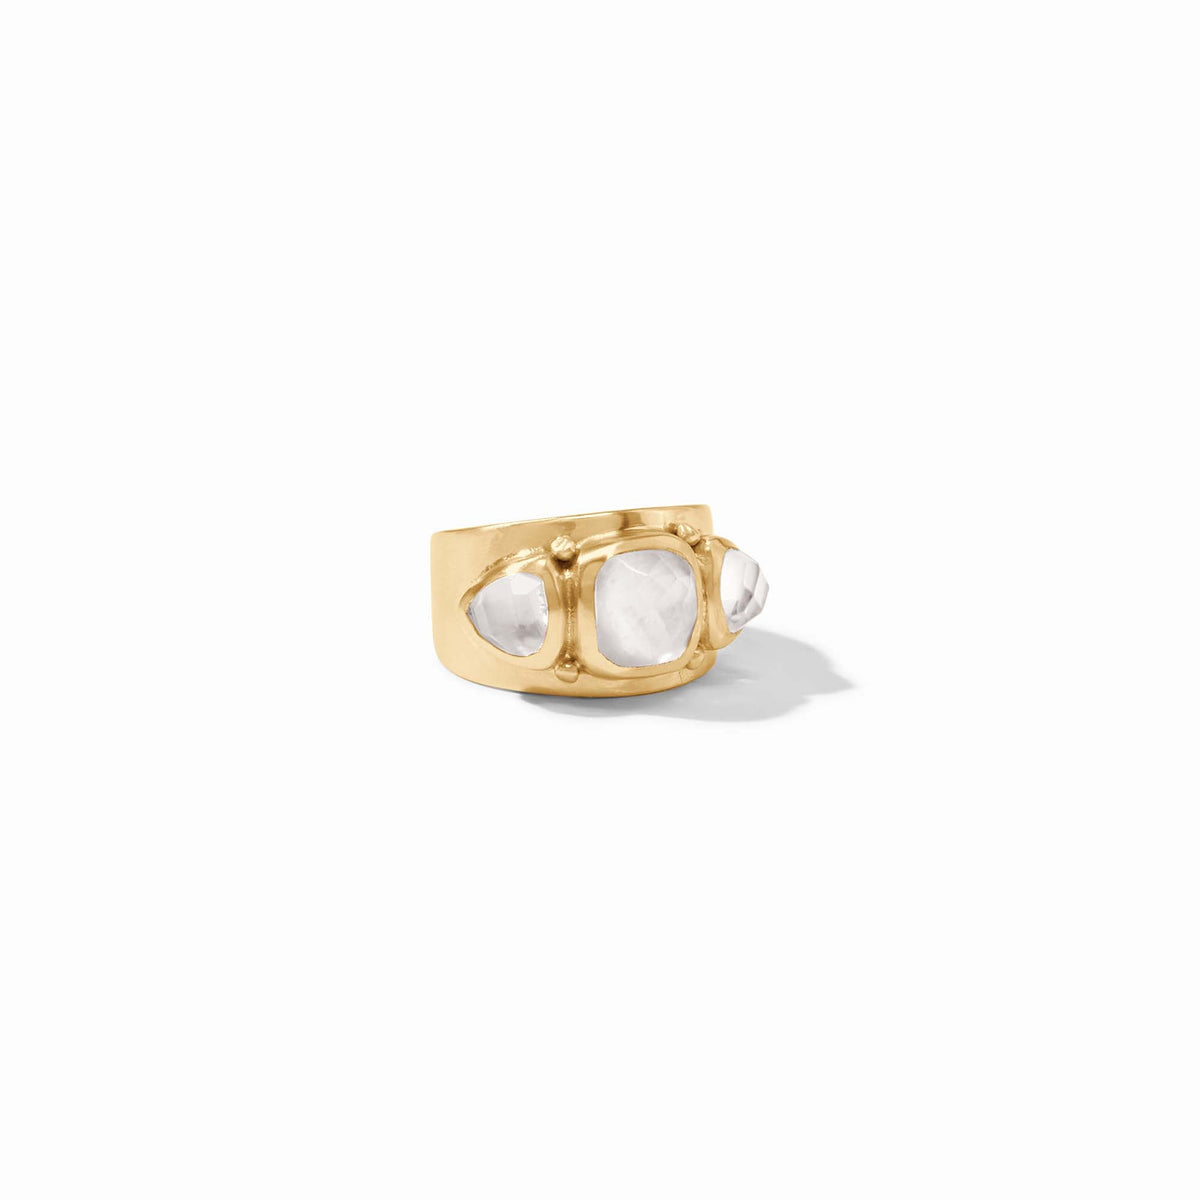 Julie Vos - Aquitaine Ring, Iridescent Clear Crystal / 8